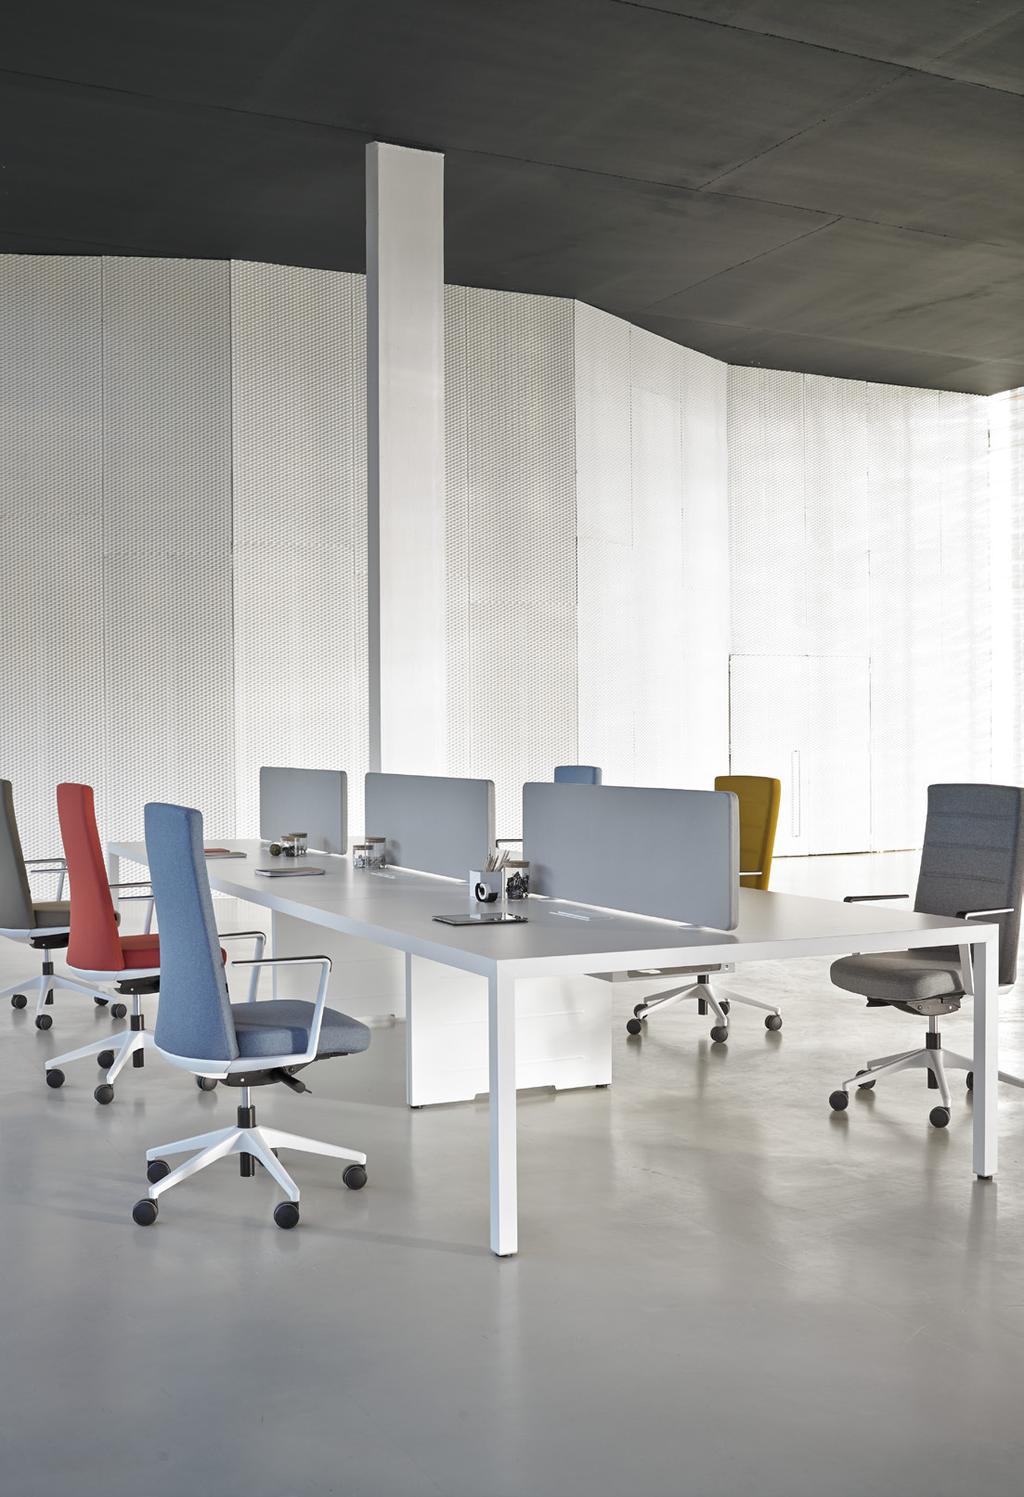 To facilitate the adaptation of PRISMA to any space, the program comes with a range of operative and meeting desks which provide maximum versatility for all types of spaces and projects.